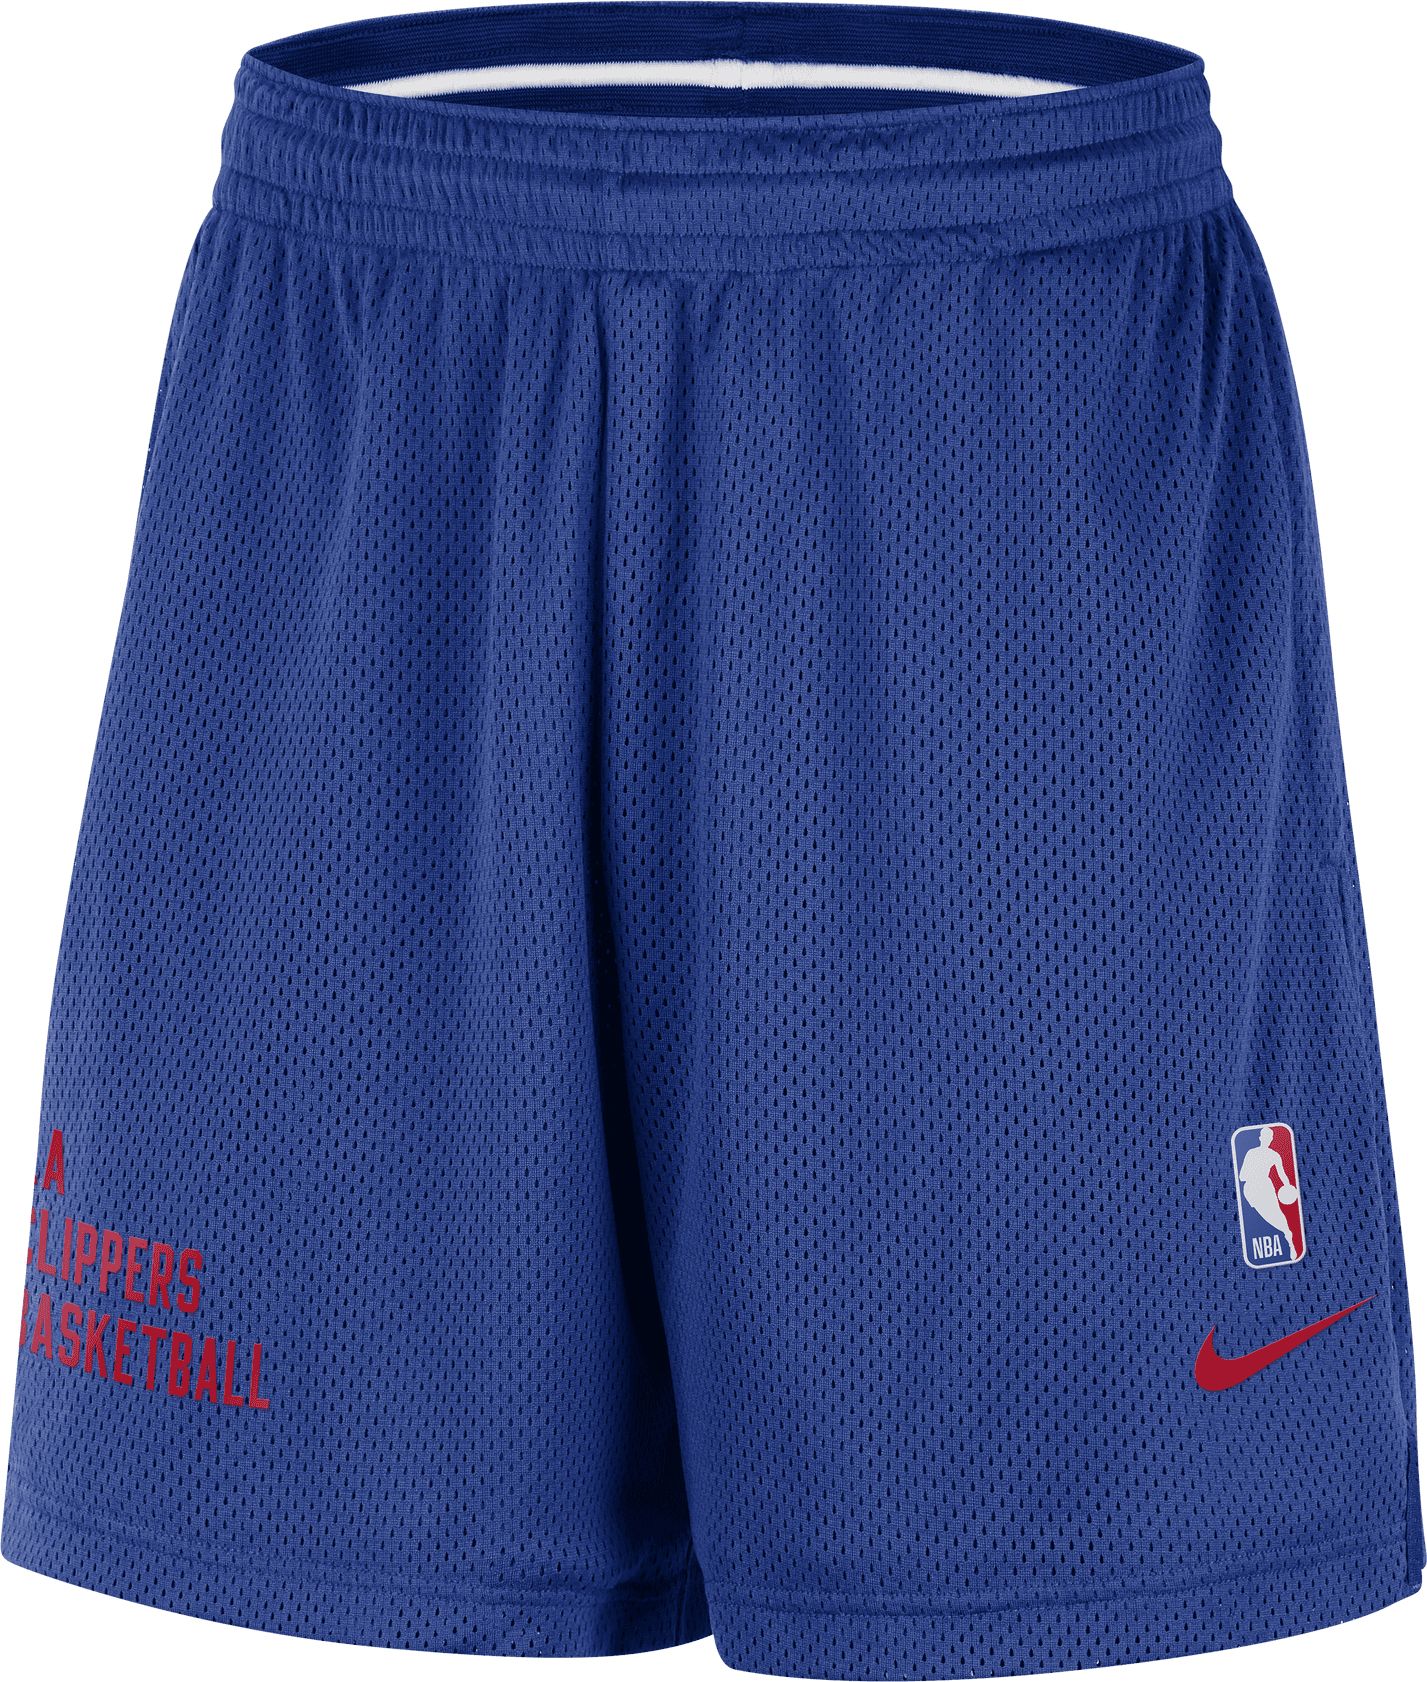 Nike Men's Los Angeles Clippers Blue Mesh Shorts